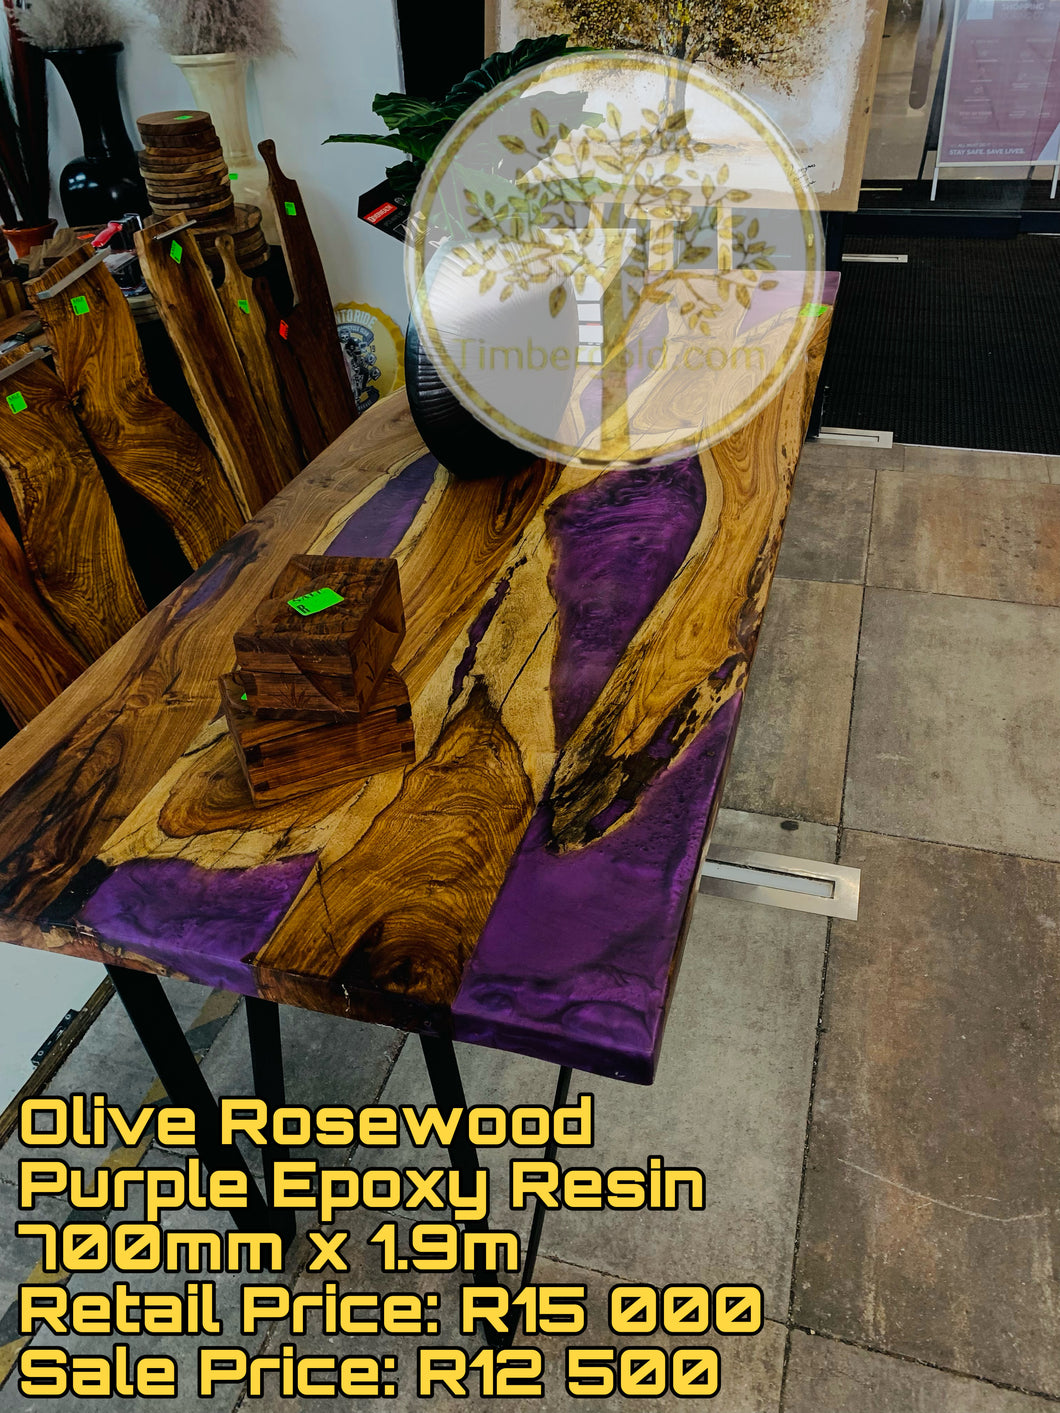 Olive Rosewood with Purple Epoxy Resin